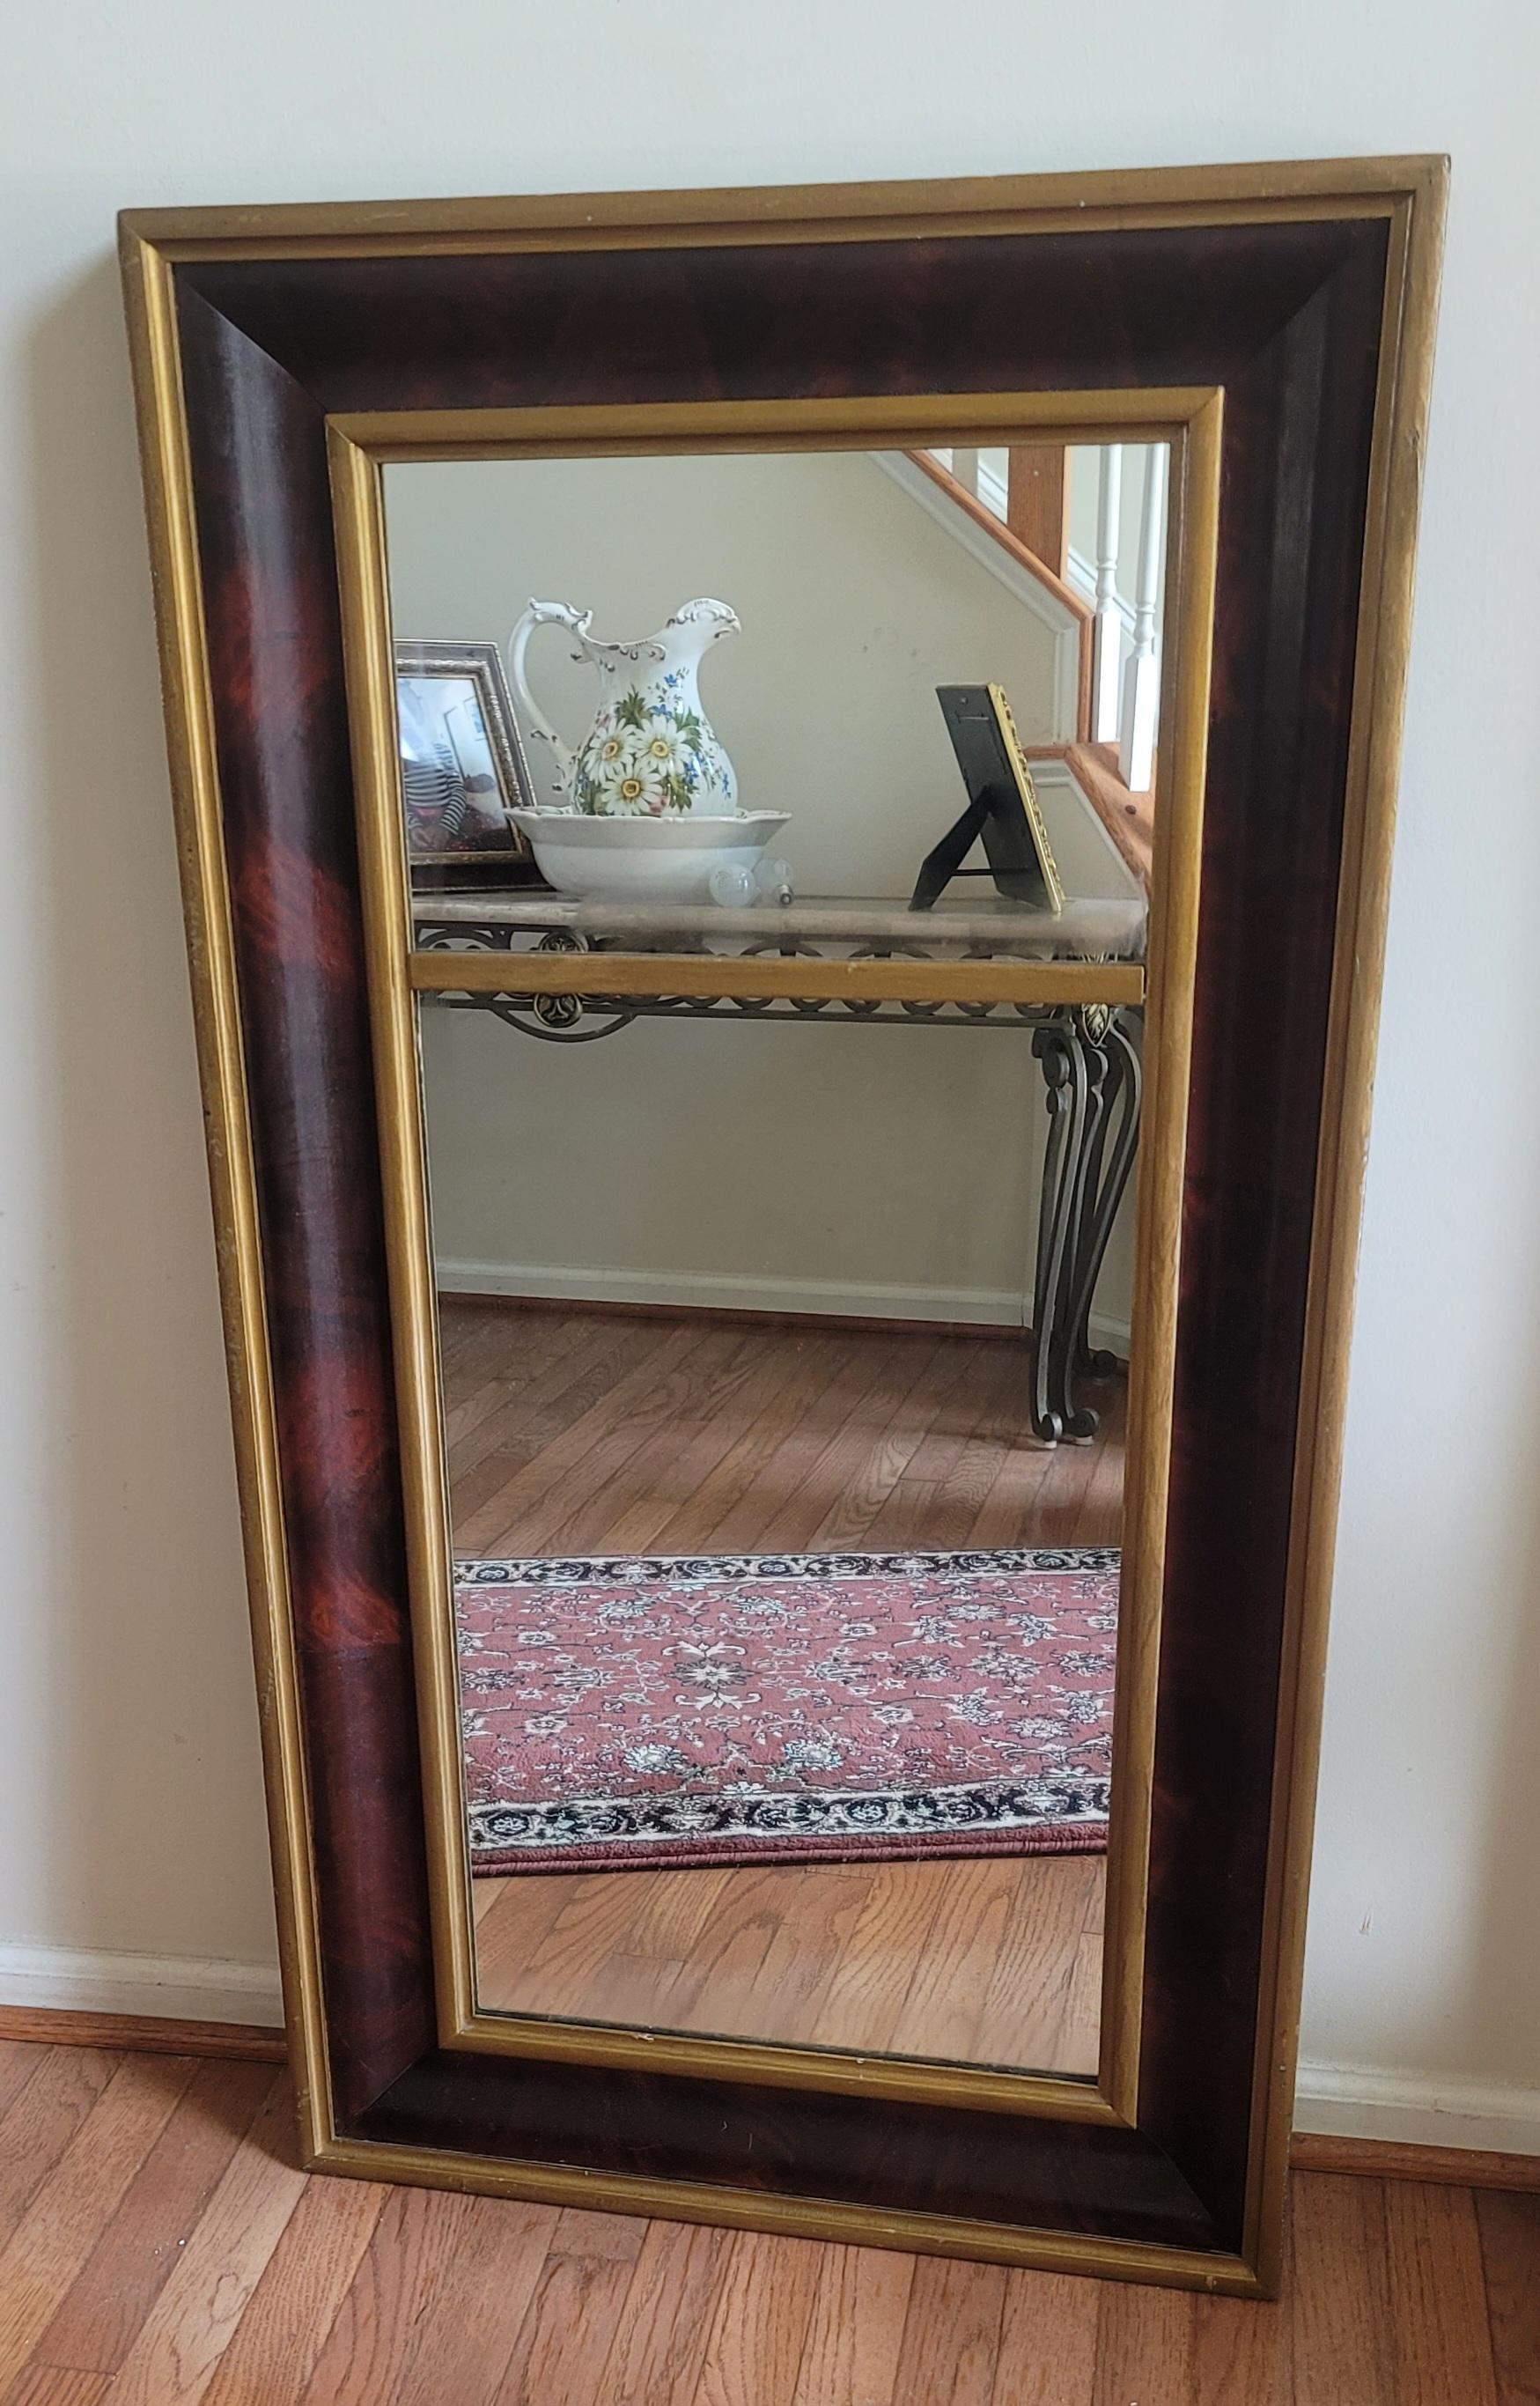 19th C. Parcel Gilt Flame Mahogany American Empire Trumeau Wall Mirror, C. 1840s In Good Condition For Sale In Germantown, MD